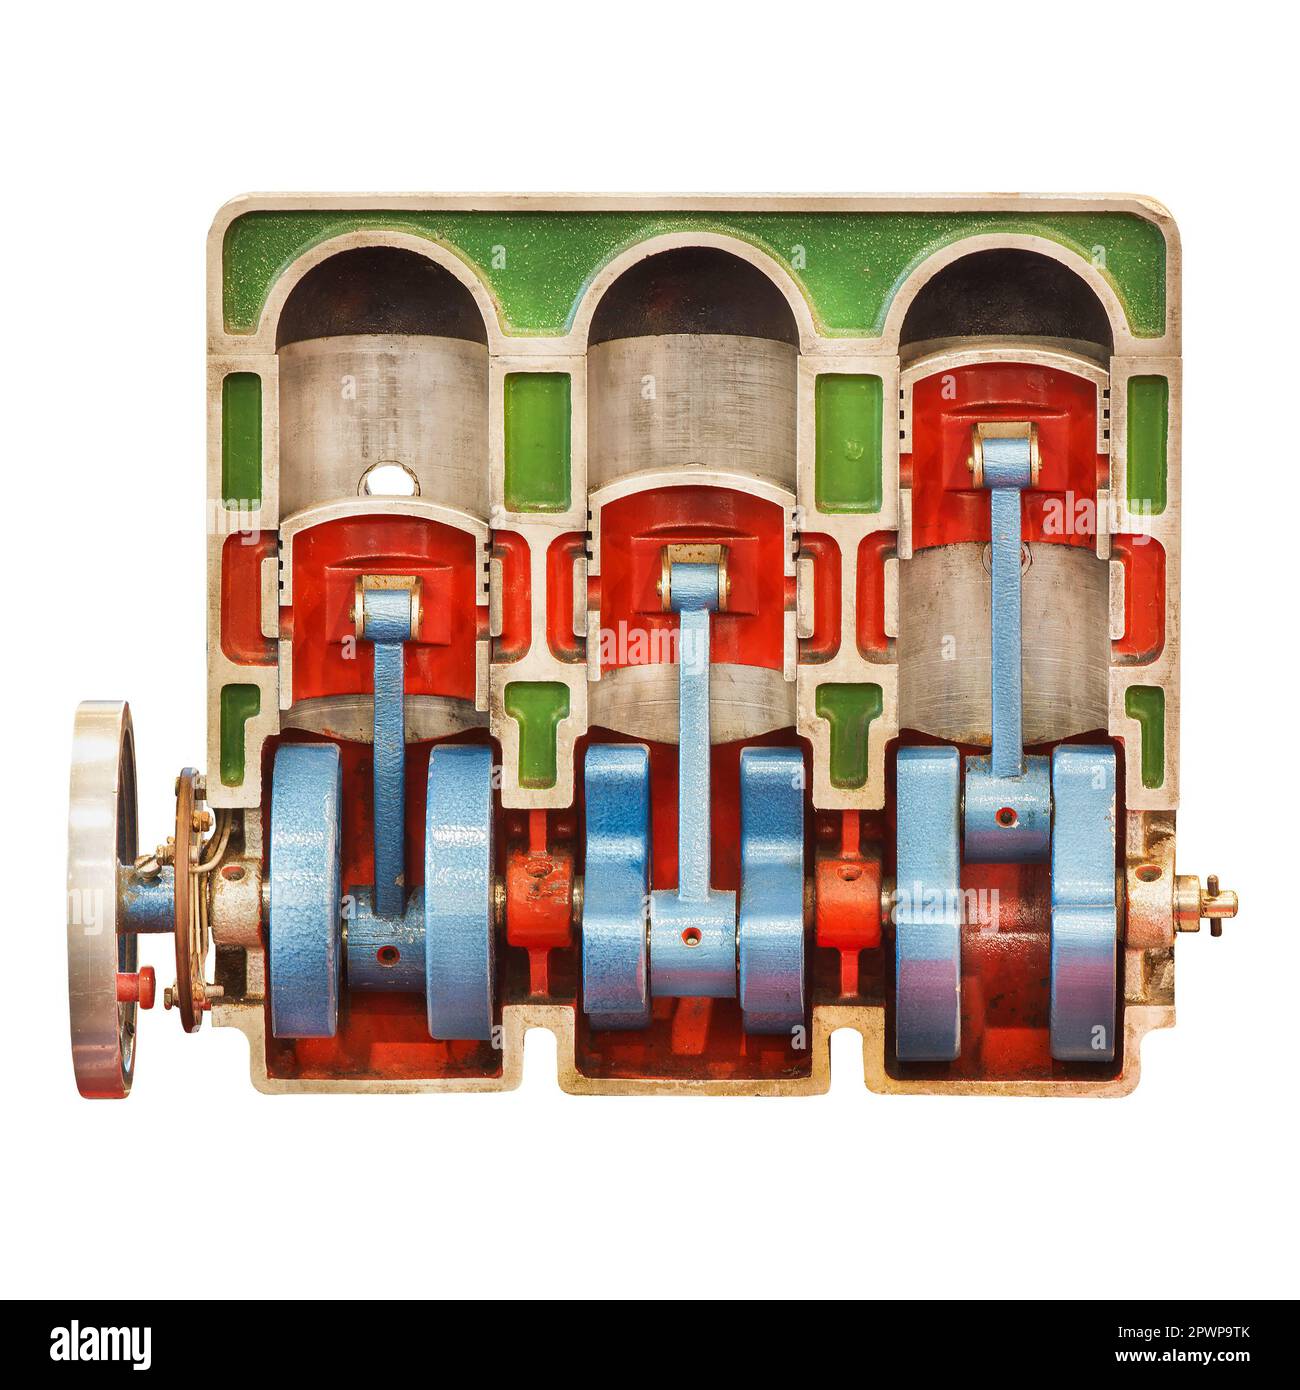 Vintage open model of a classic car engine with pistons used for education purposes Stock Photo